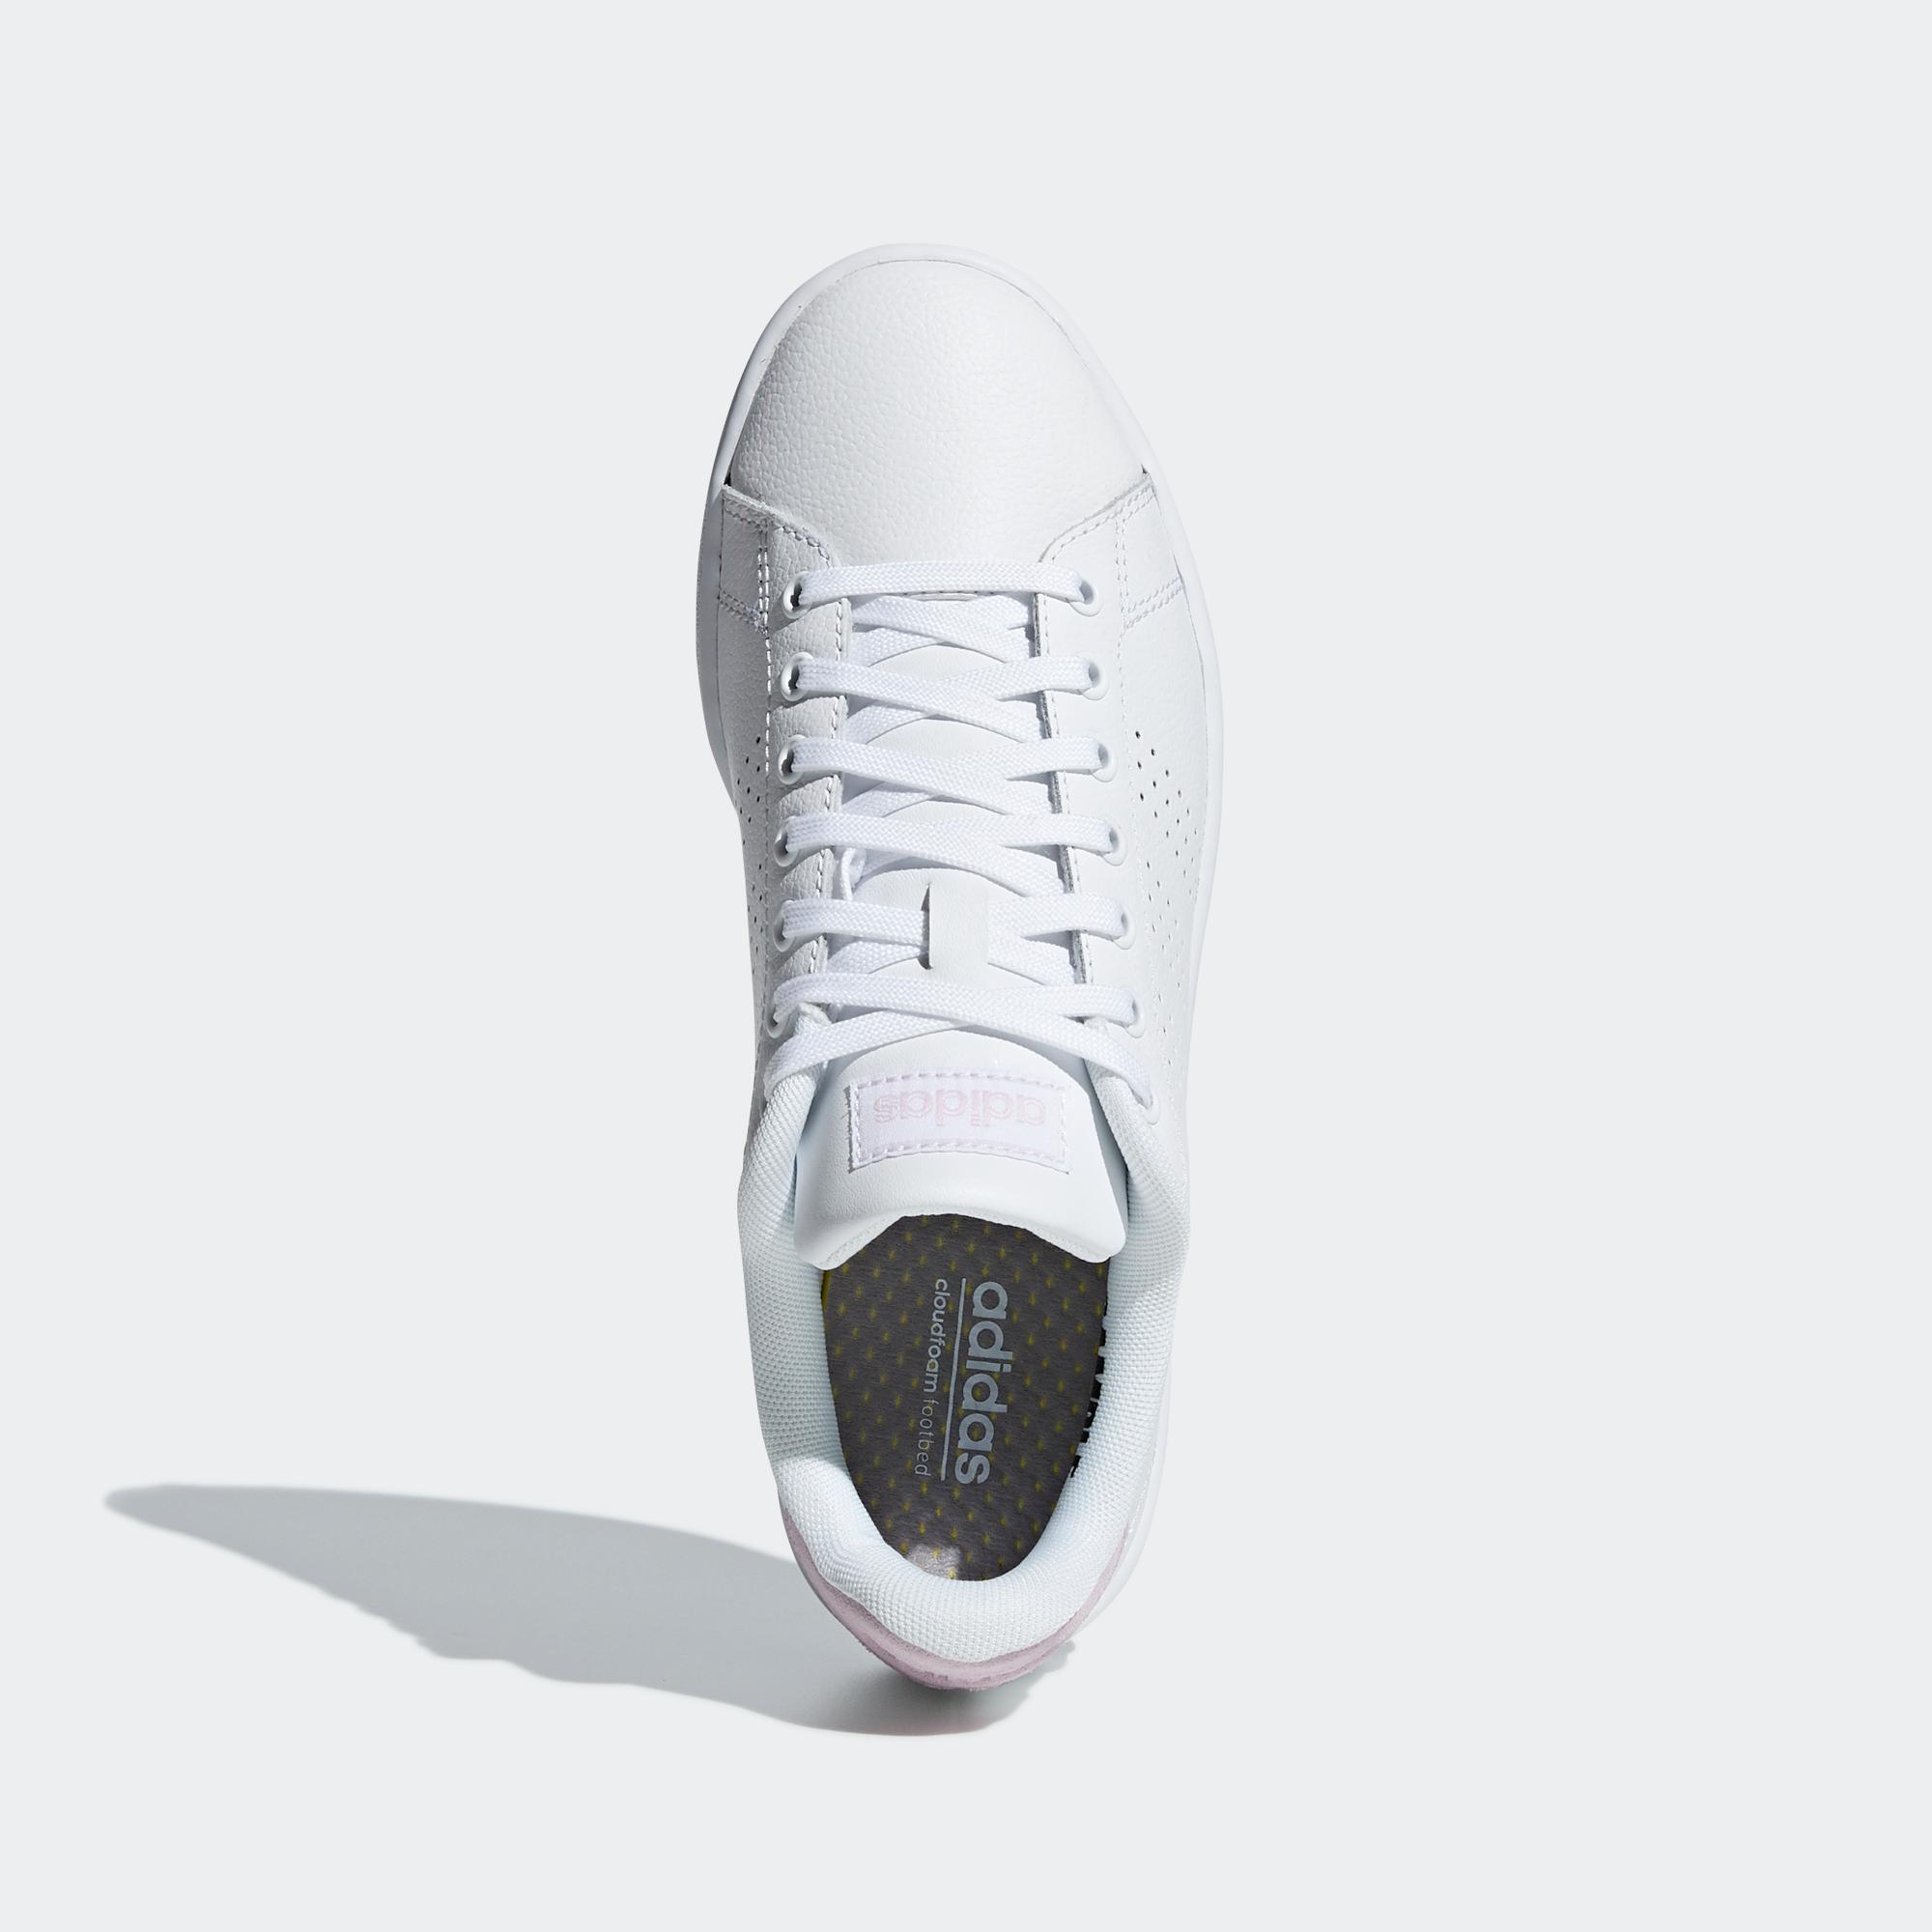 adidas neo cloudfoam advantage adapt sneakers The Best Discounts Online - OFF 67%